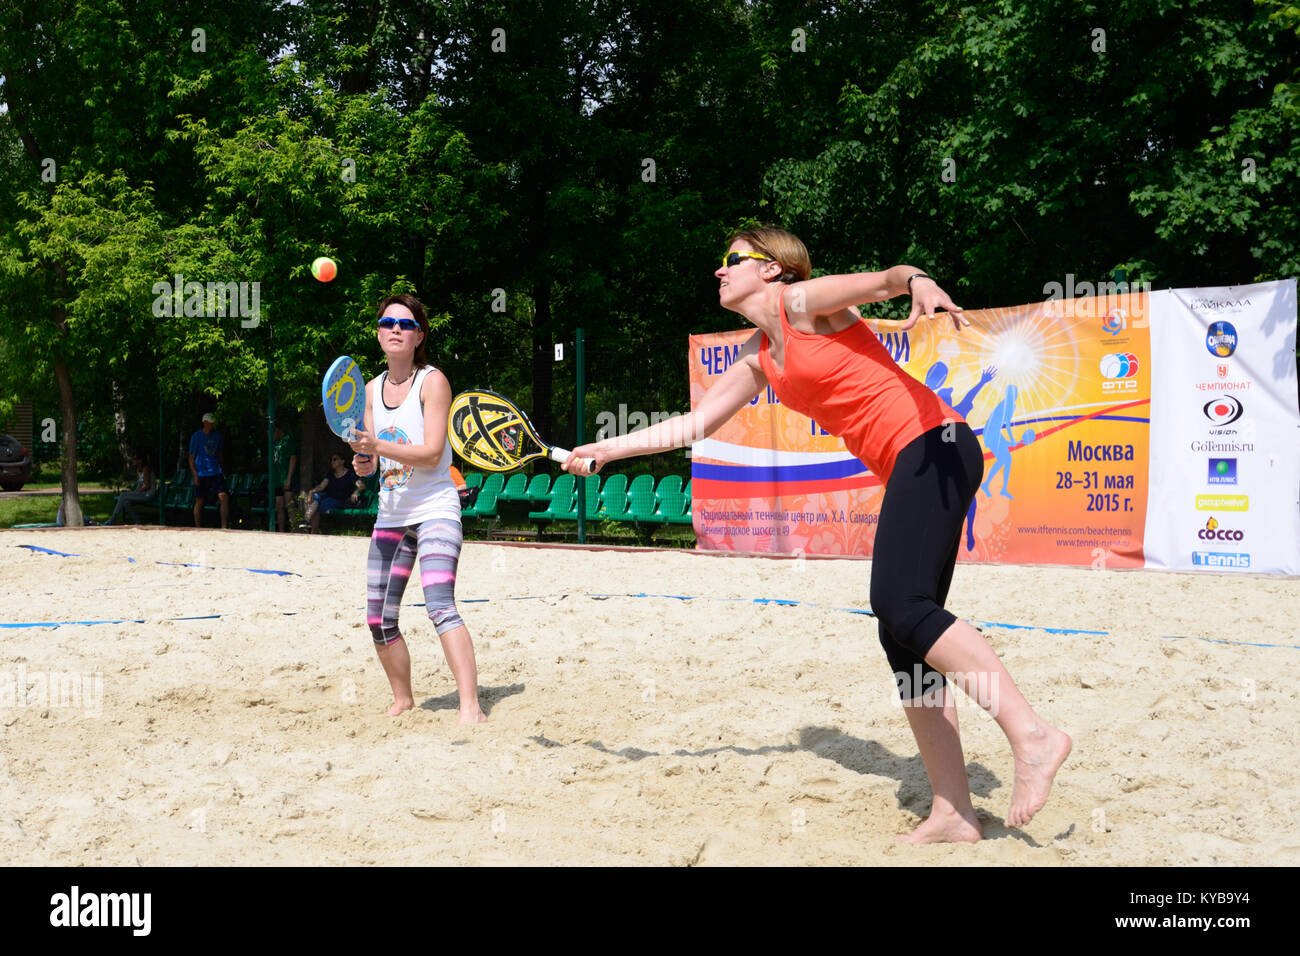 Moscow, Russia - May 29, 2015: Yulia Chubarova and Nikolay Guriev in the match of Russian beach tennis championship. 120 adults and 28 young athletes  Stock Photo